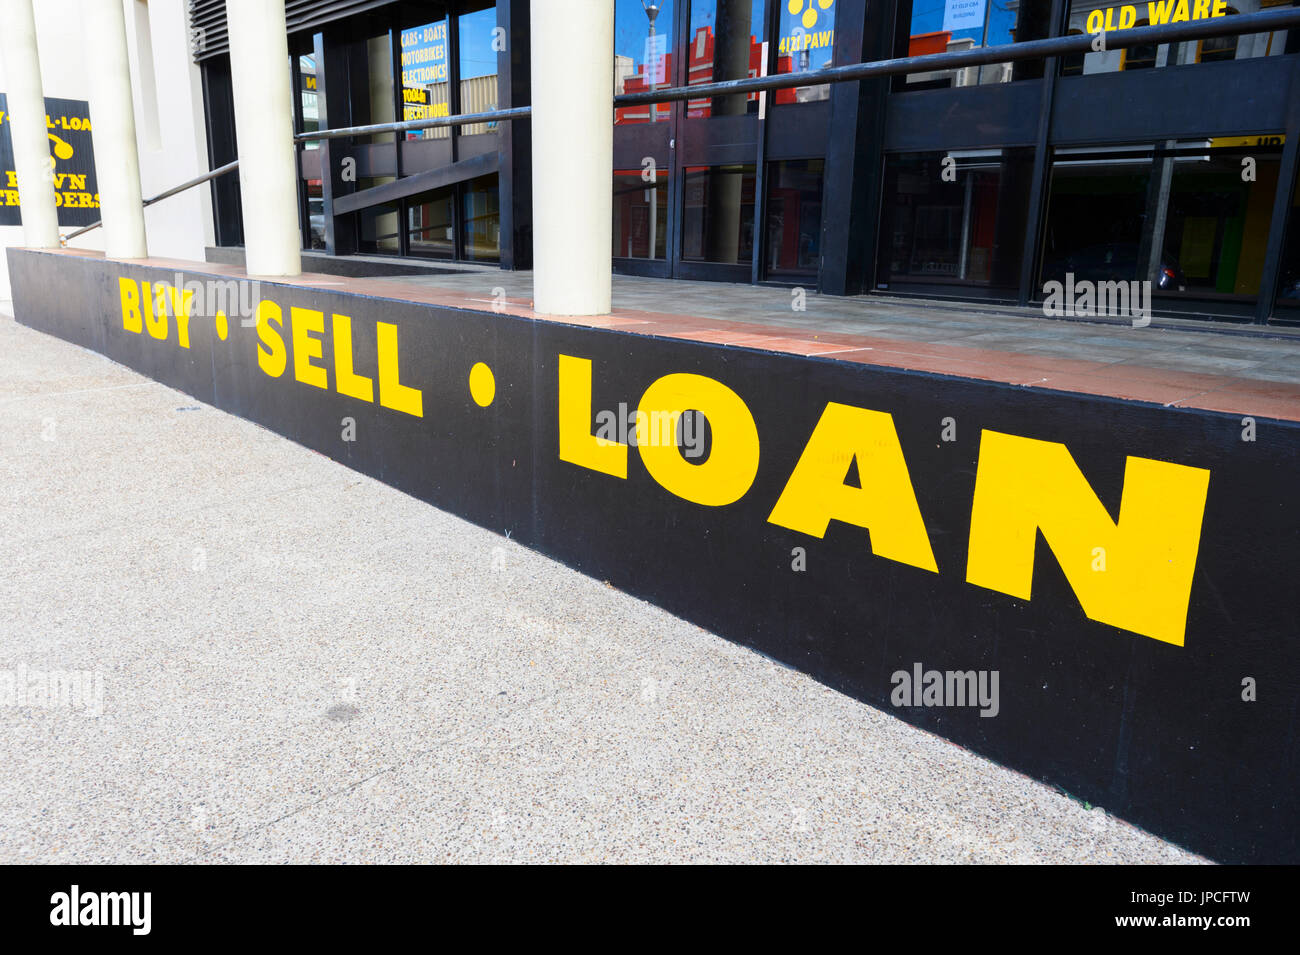 Buy Sell Loan sign, Queensland, QLD, Australia Stock Photo